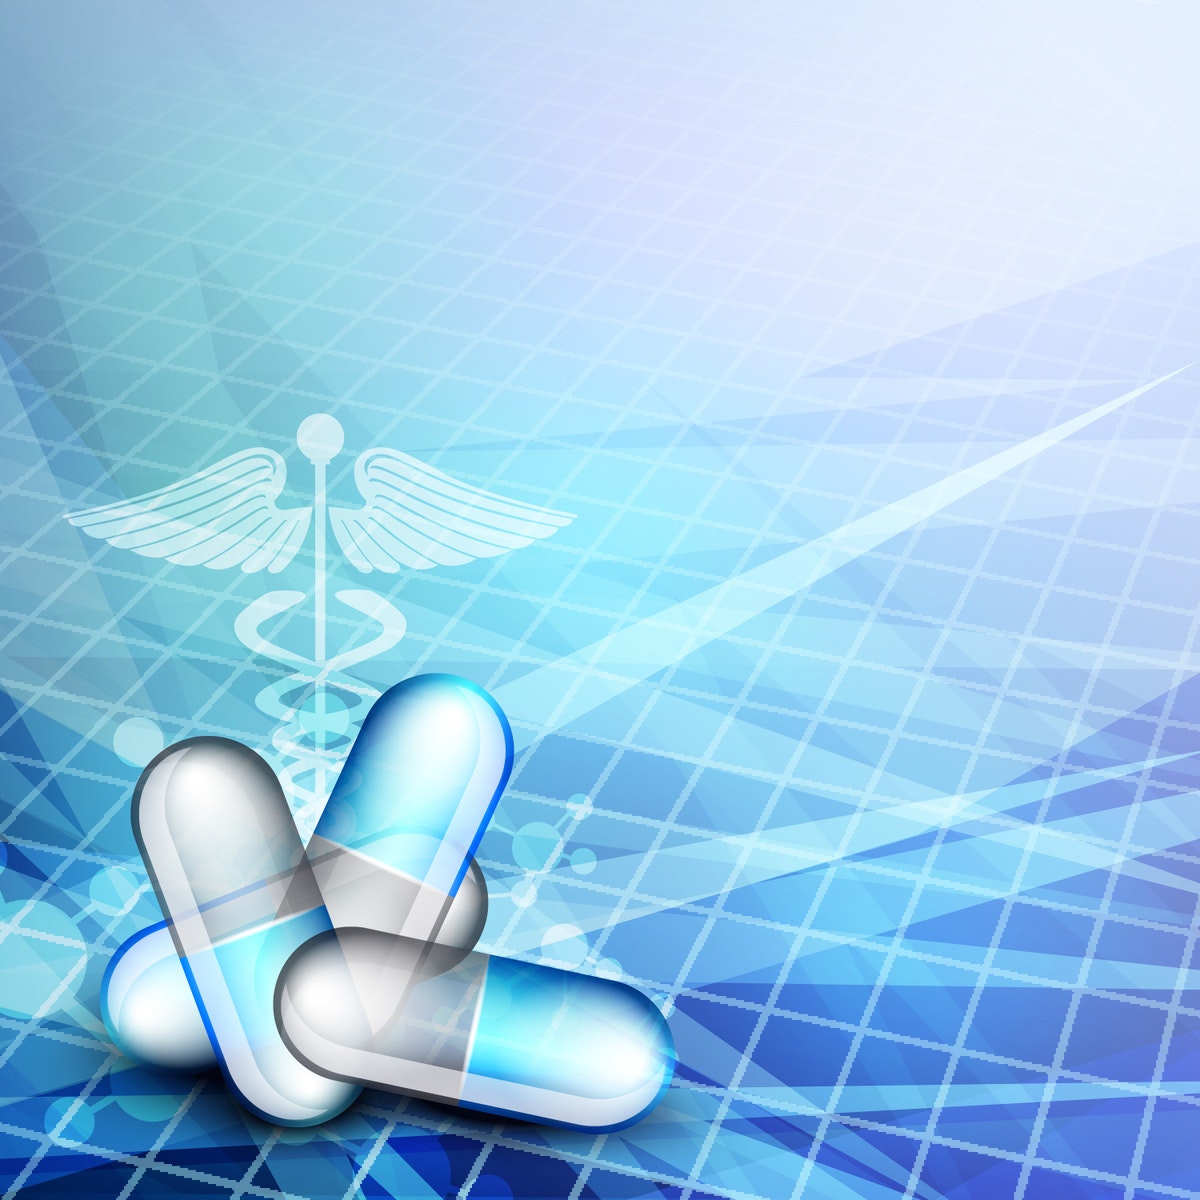 pharmaceutical medical device innovations coursera